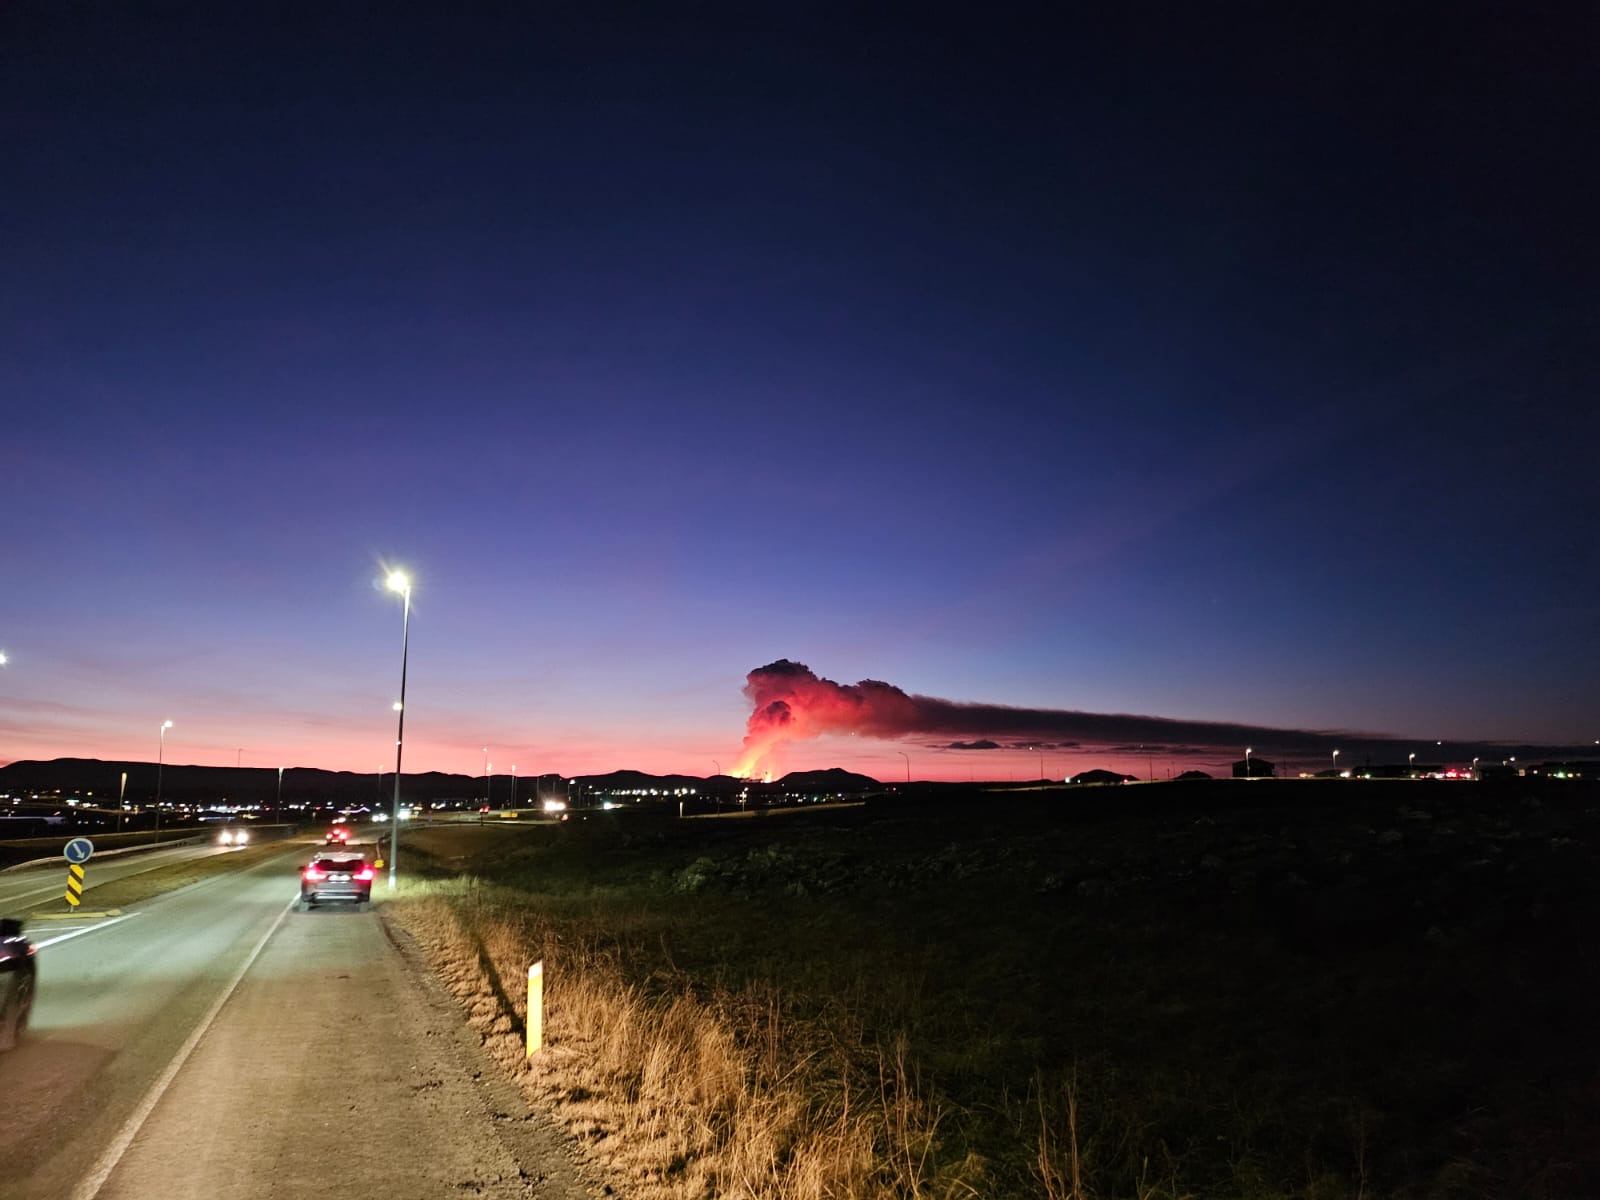 A picture of the Iceland volcano erupting in the distance, with a plume of smoke rising in the air